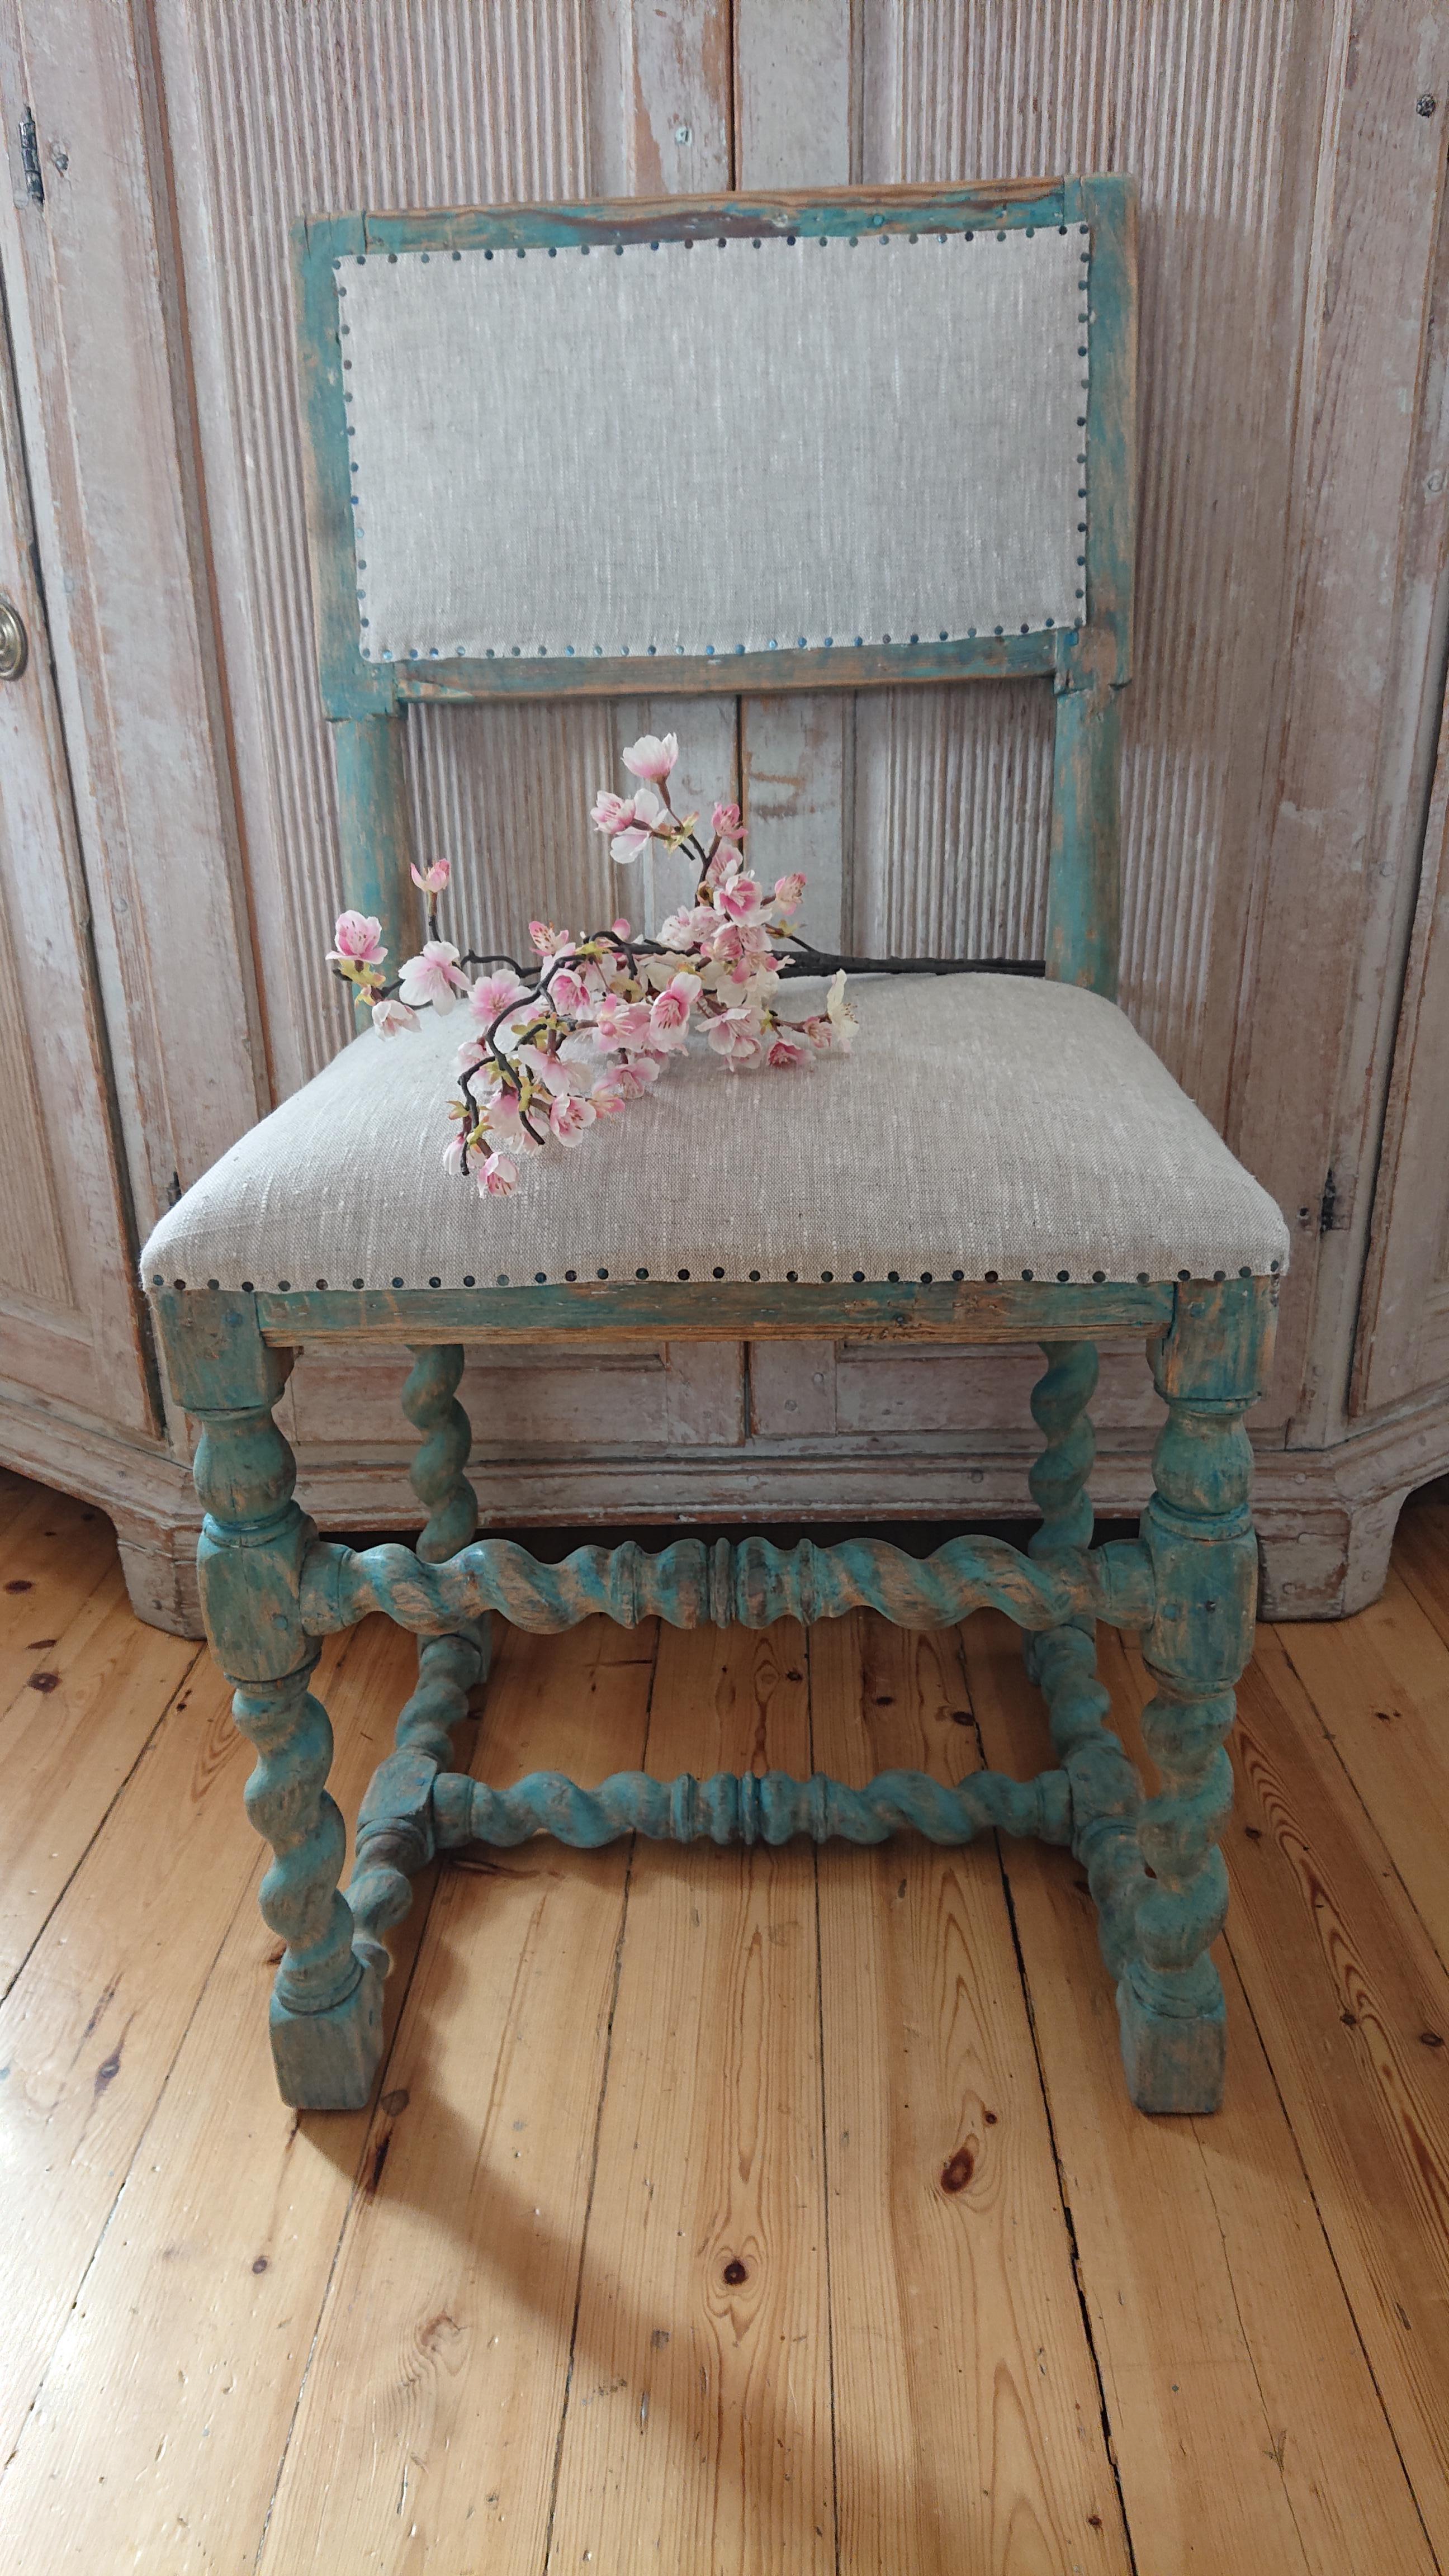 18th Century Swedish late baroque chair from Sundsvall Medelpad, Northern Sweden
A lovely chair with fantastic patina.
Scraped by hand to its well preserved original color.
Beautiful color.
Fine turned legs. 
Solid frame & stable in